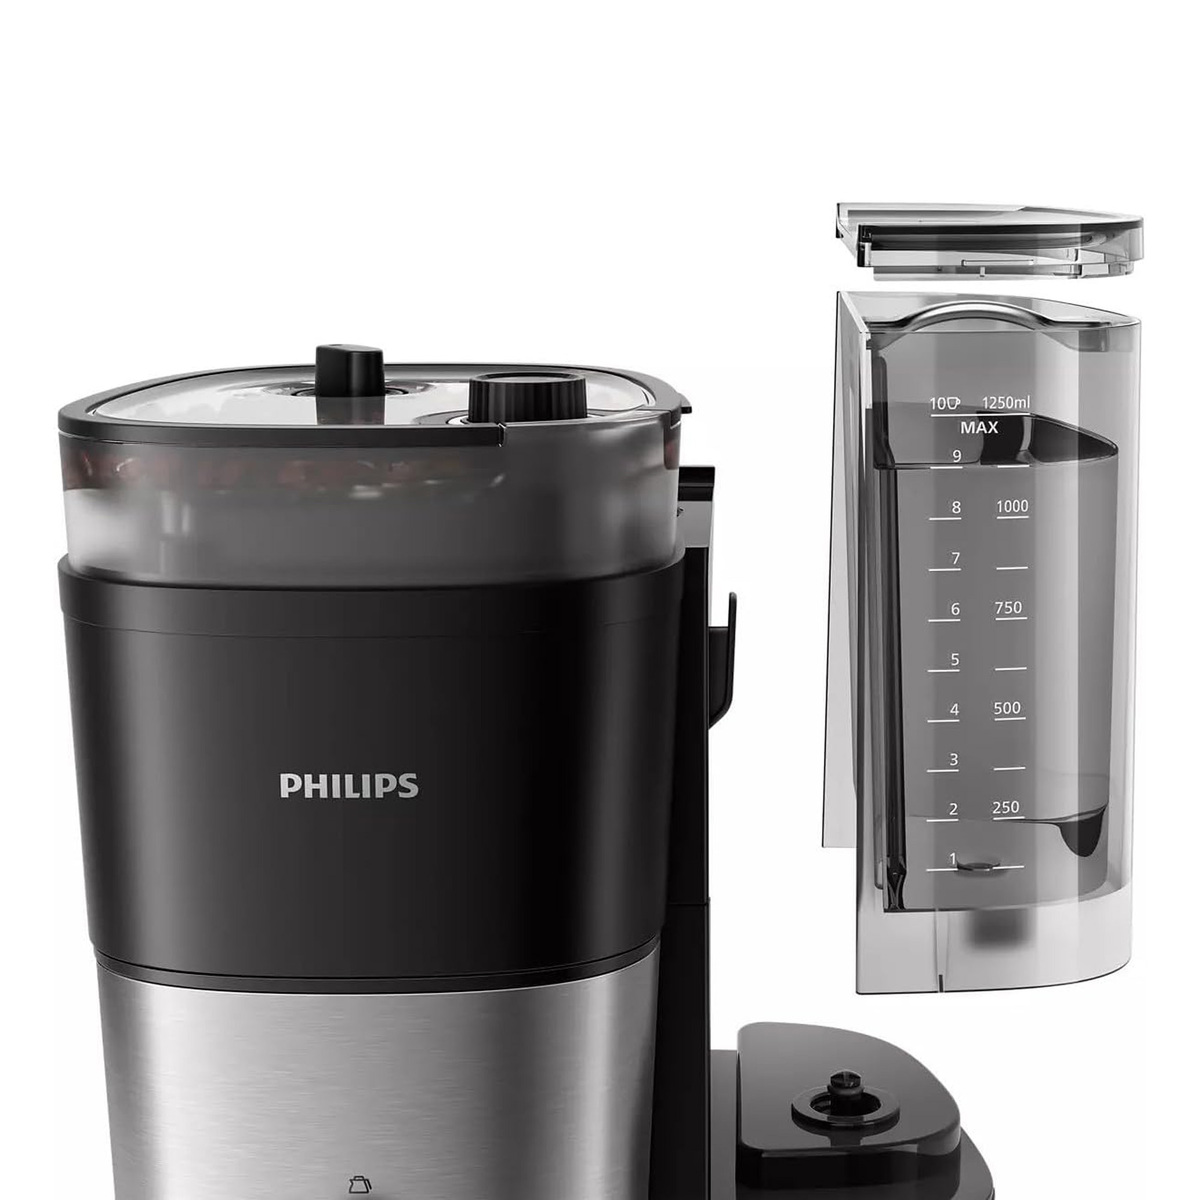 Philips All-in-1 Brew Drip Coffee Maker, 1.25 L, Black and Silver, HD7900/50